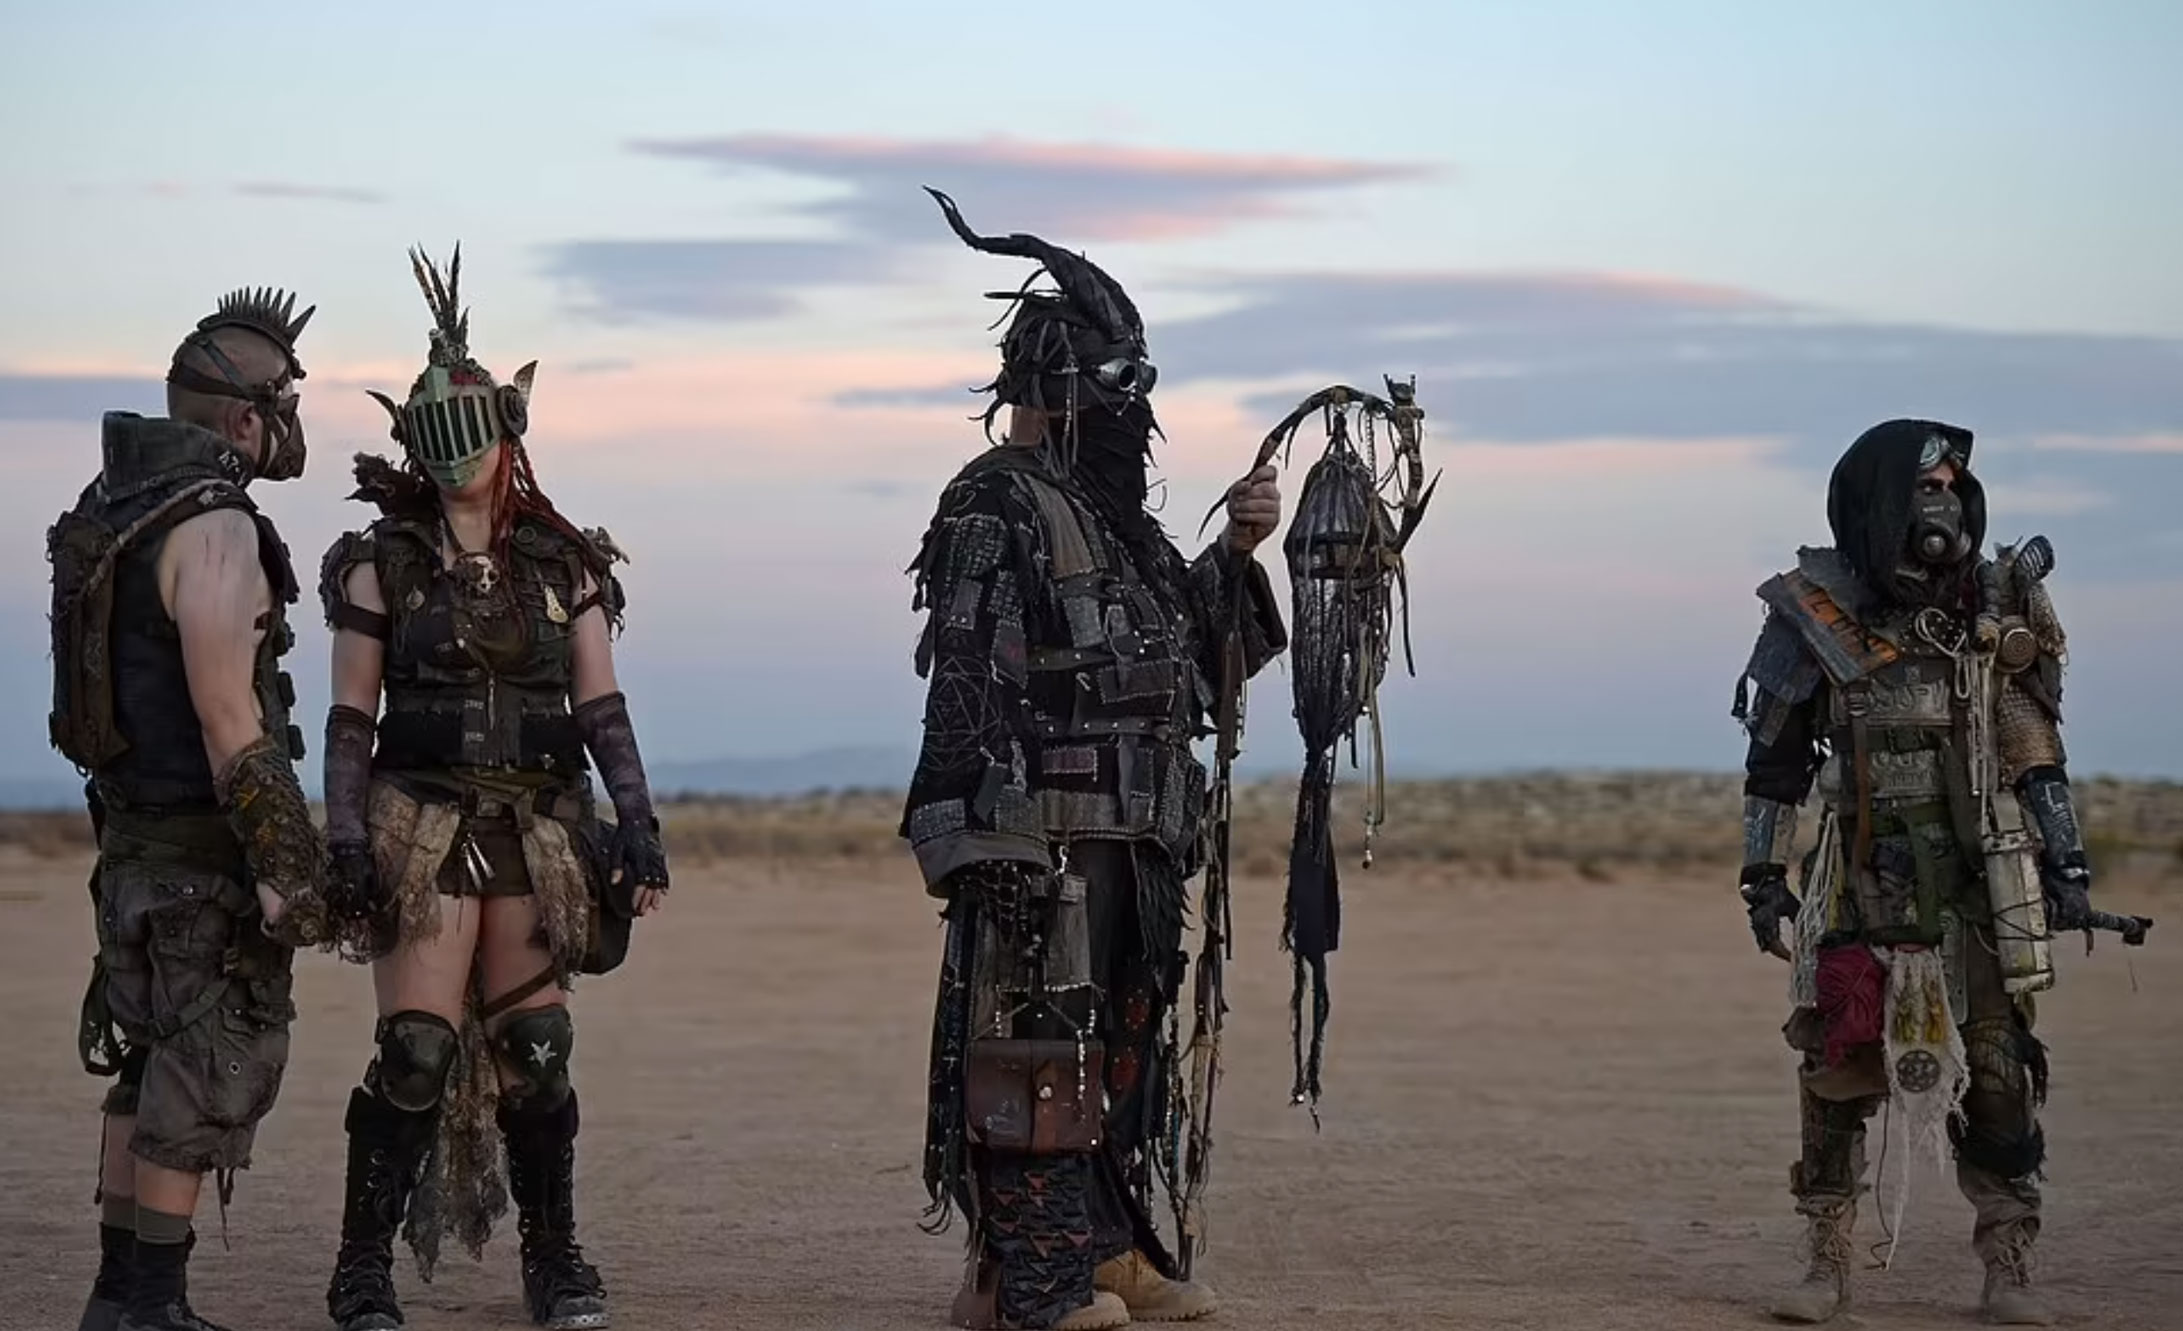 Mad Max Cosplayers Take Over Mojave Desert for Wasteland Weekend - Wow ...